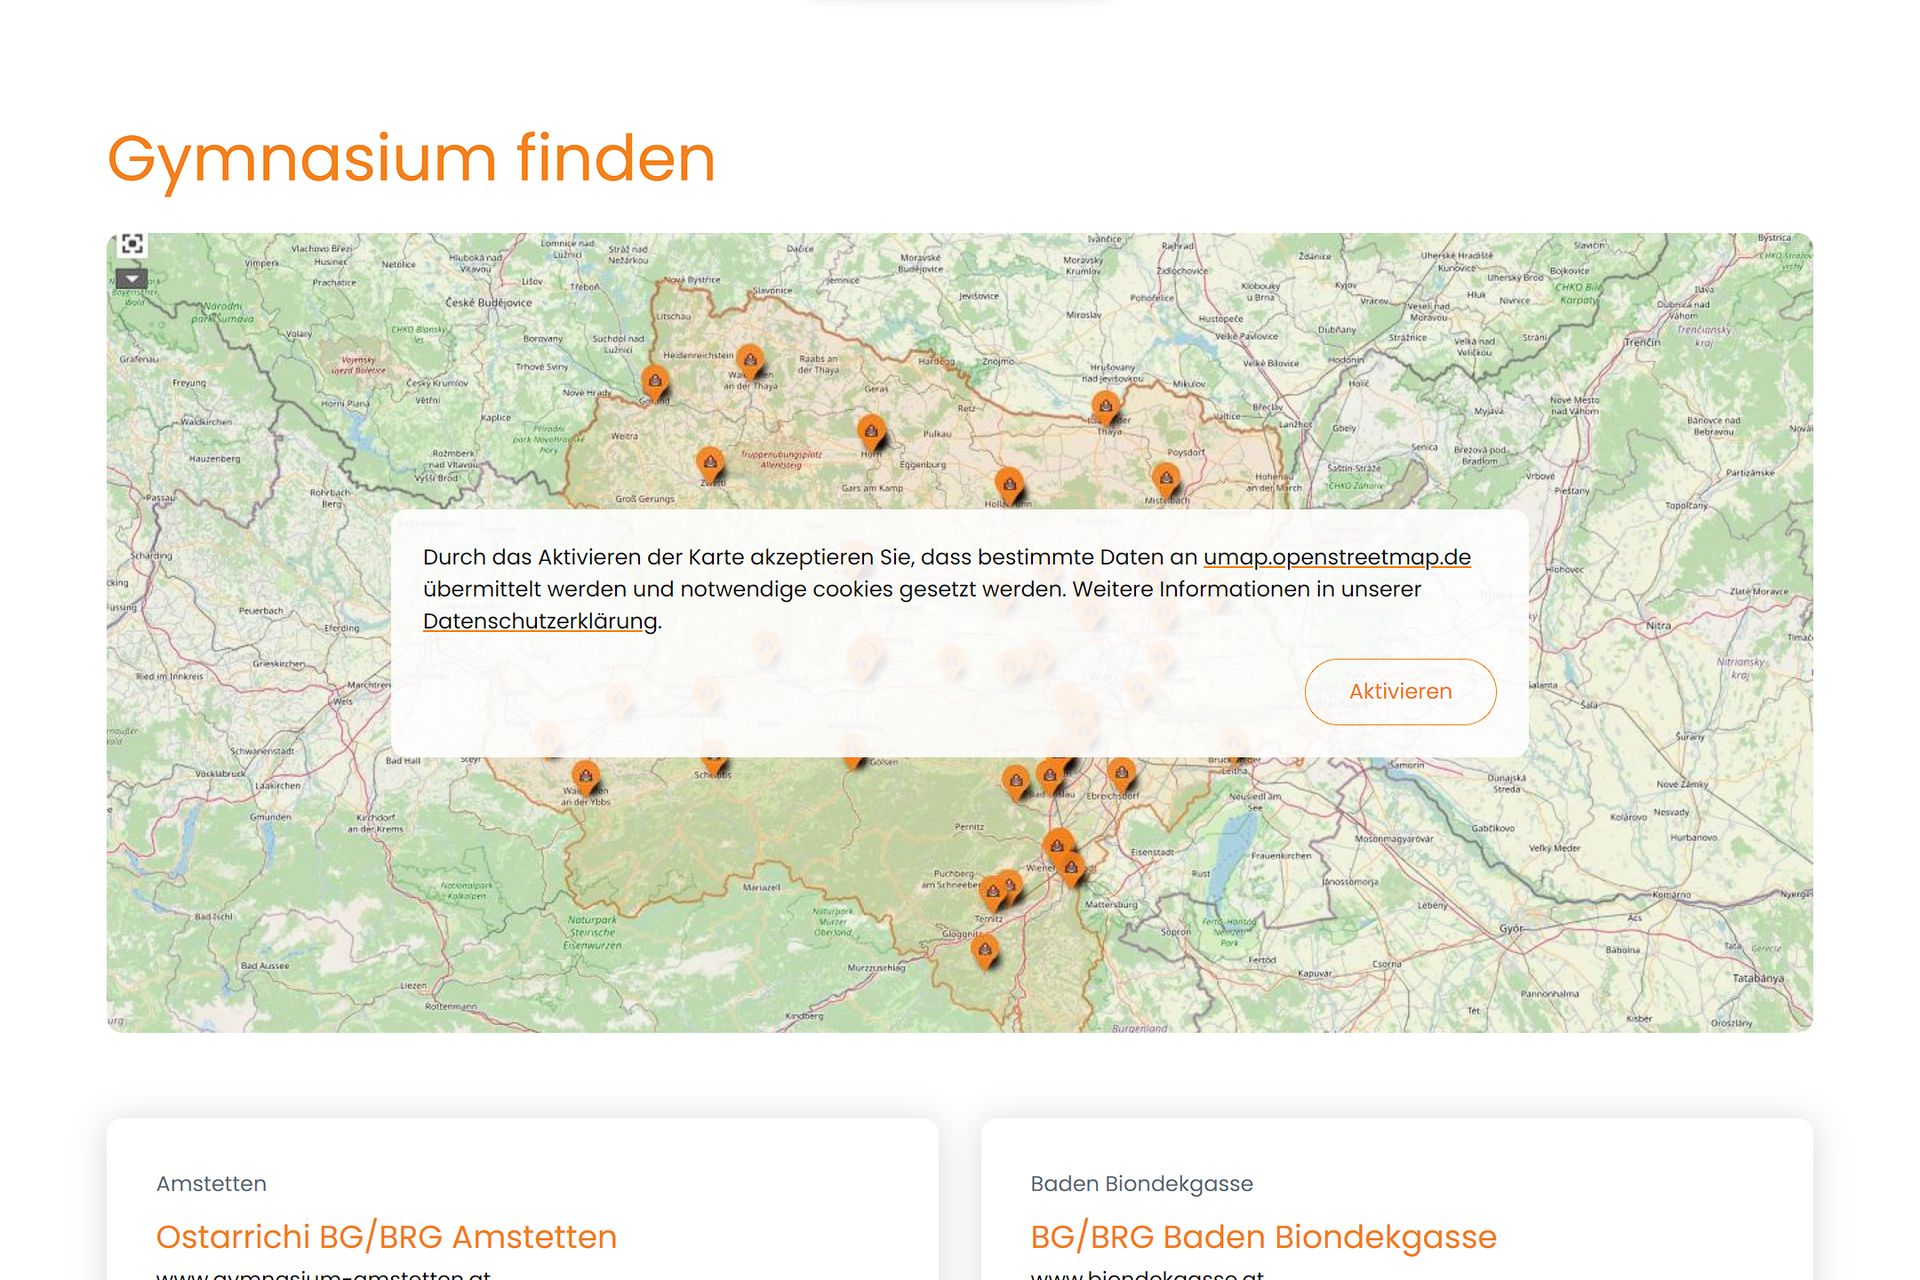 Screenshot of the 'Gymnasium finden' page of the gymnasien-in-noe.at website showing an interactive map